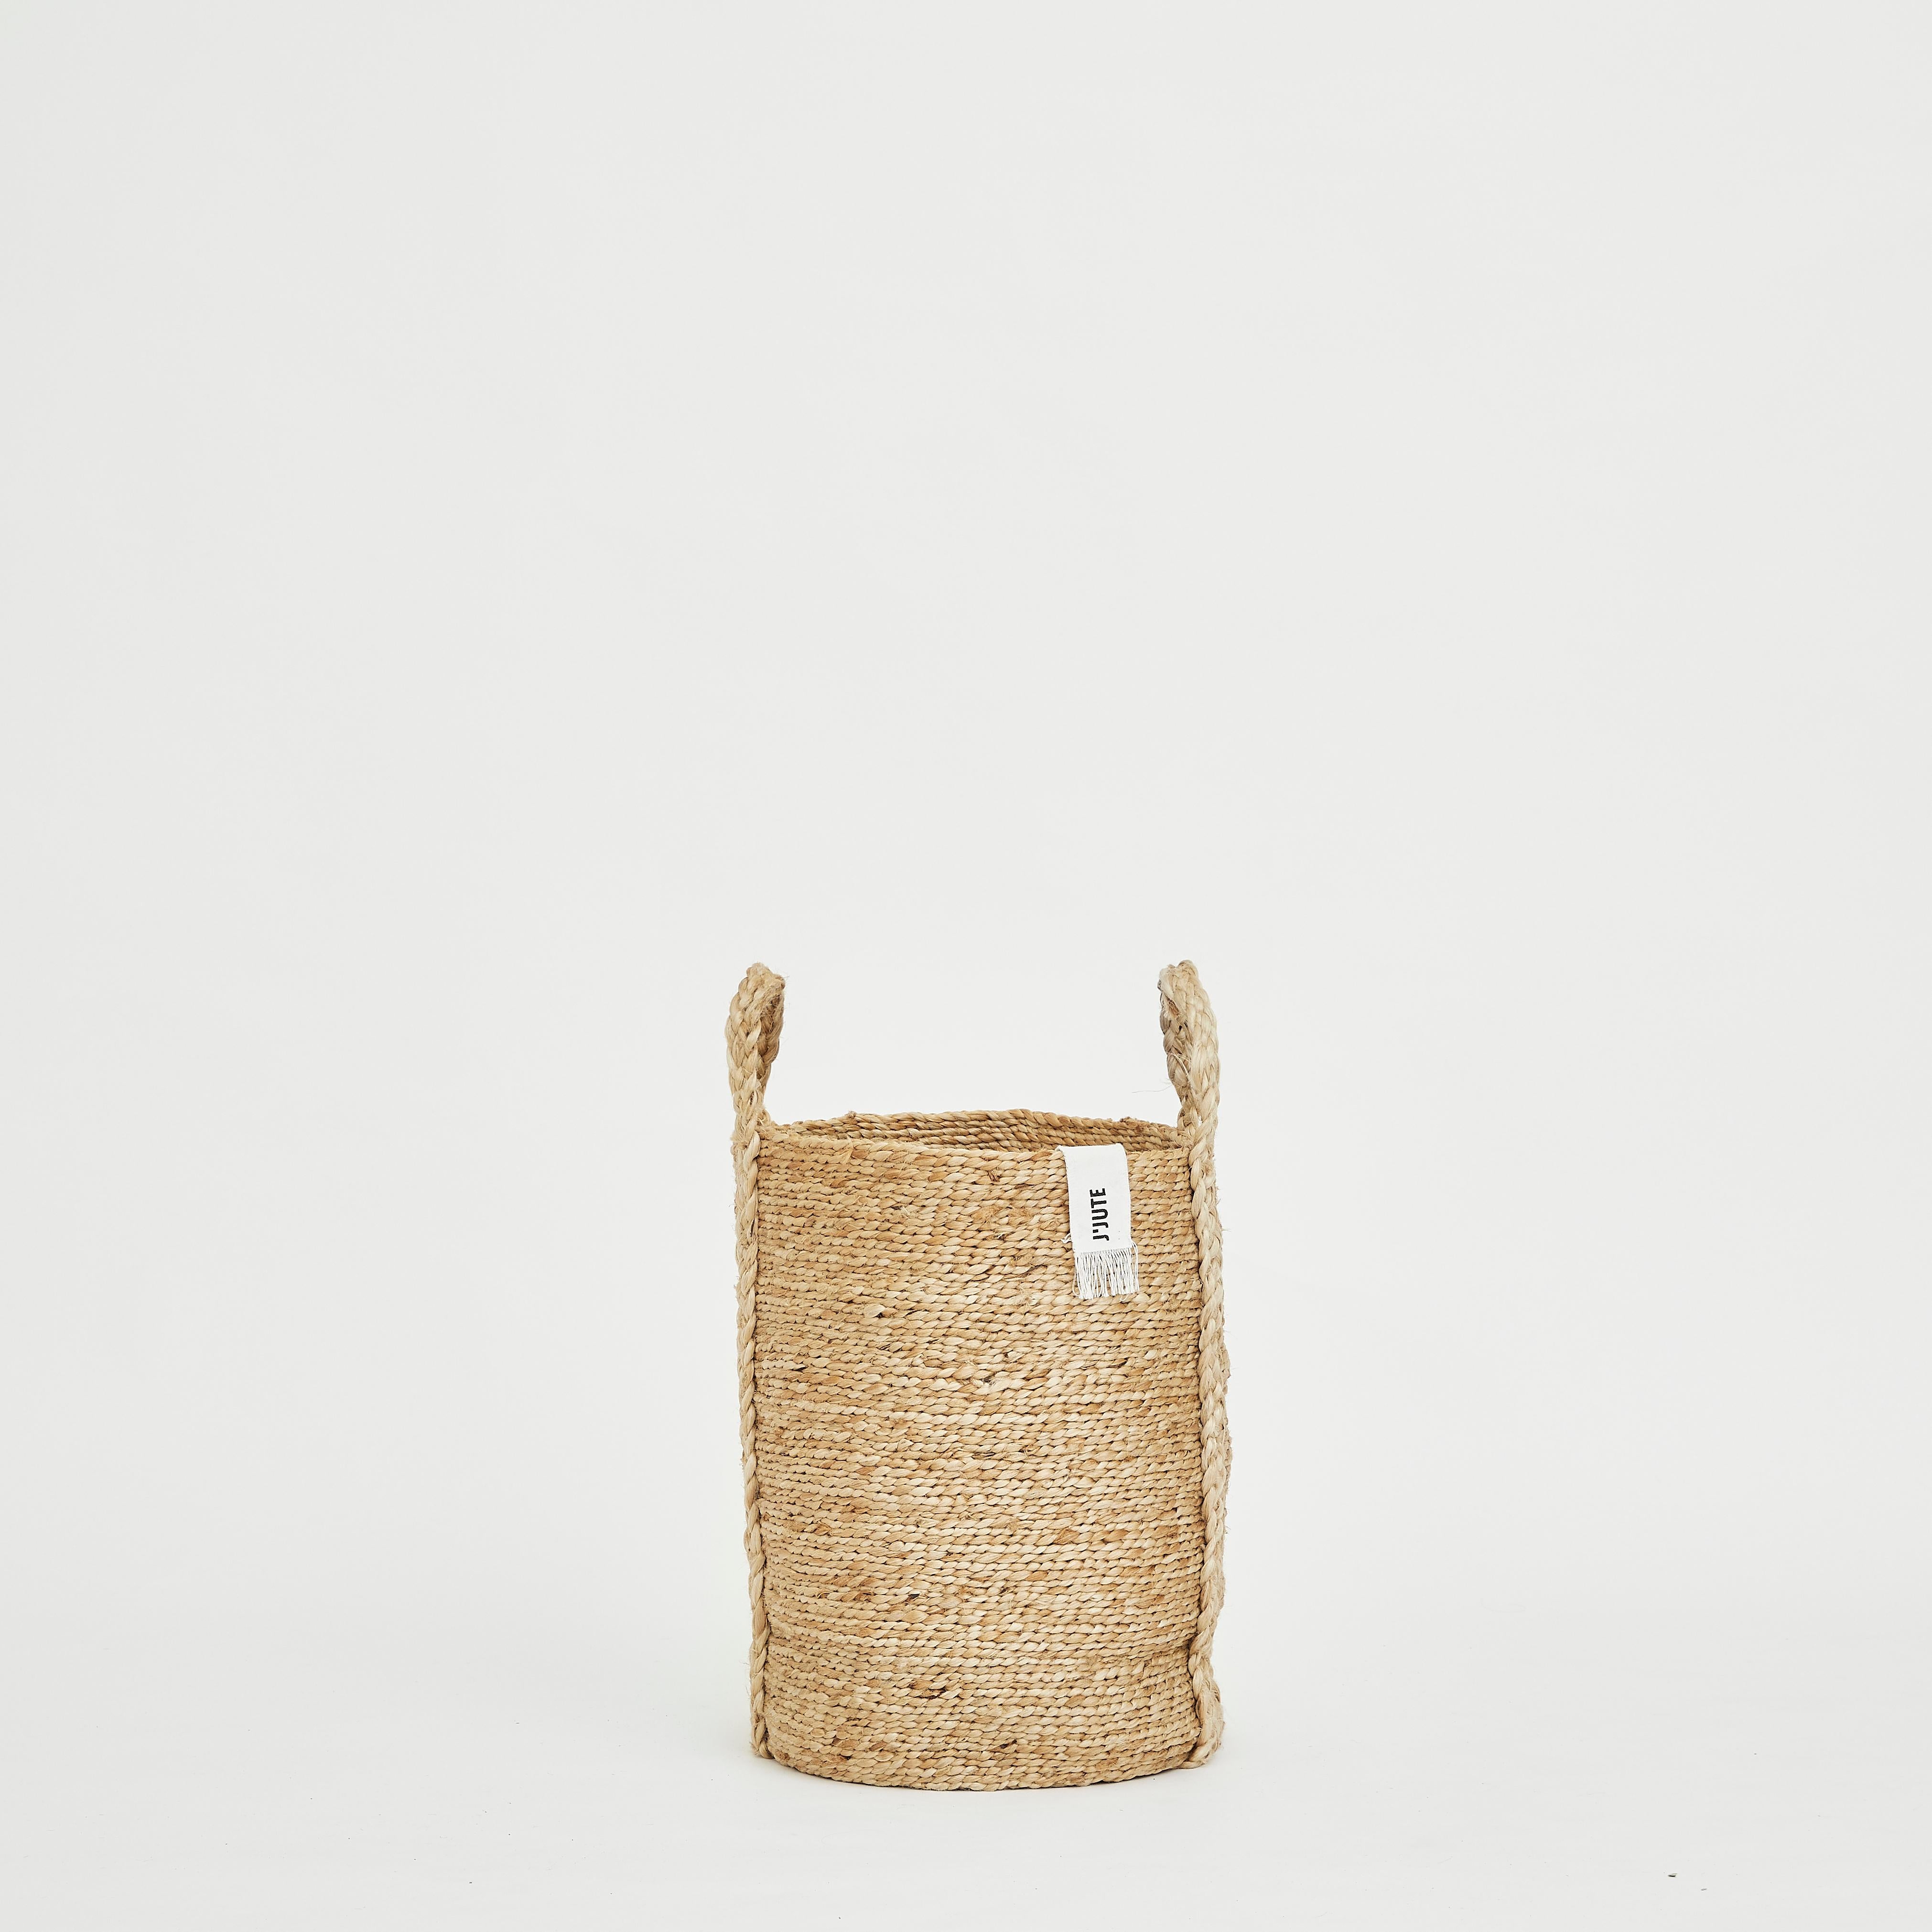 J'Jute is an Australian Luxury home brand that offers uncompromising quality handmade objects for the home. Each J'Jute style is designed by Taylor and Nicholas Barber in Bondi Beach, Australia and 100% Handwoven. J